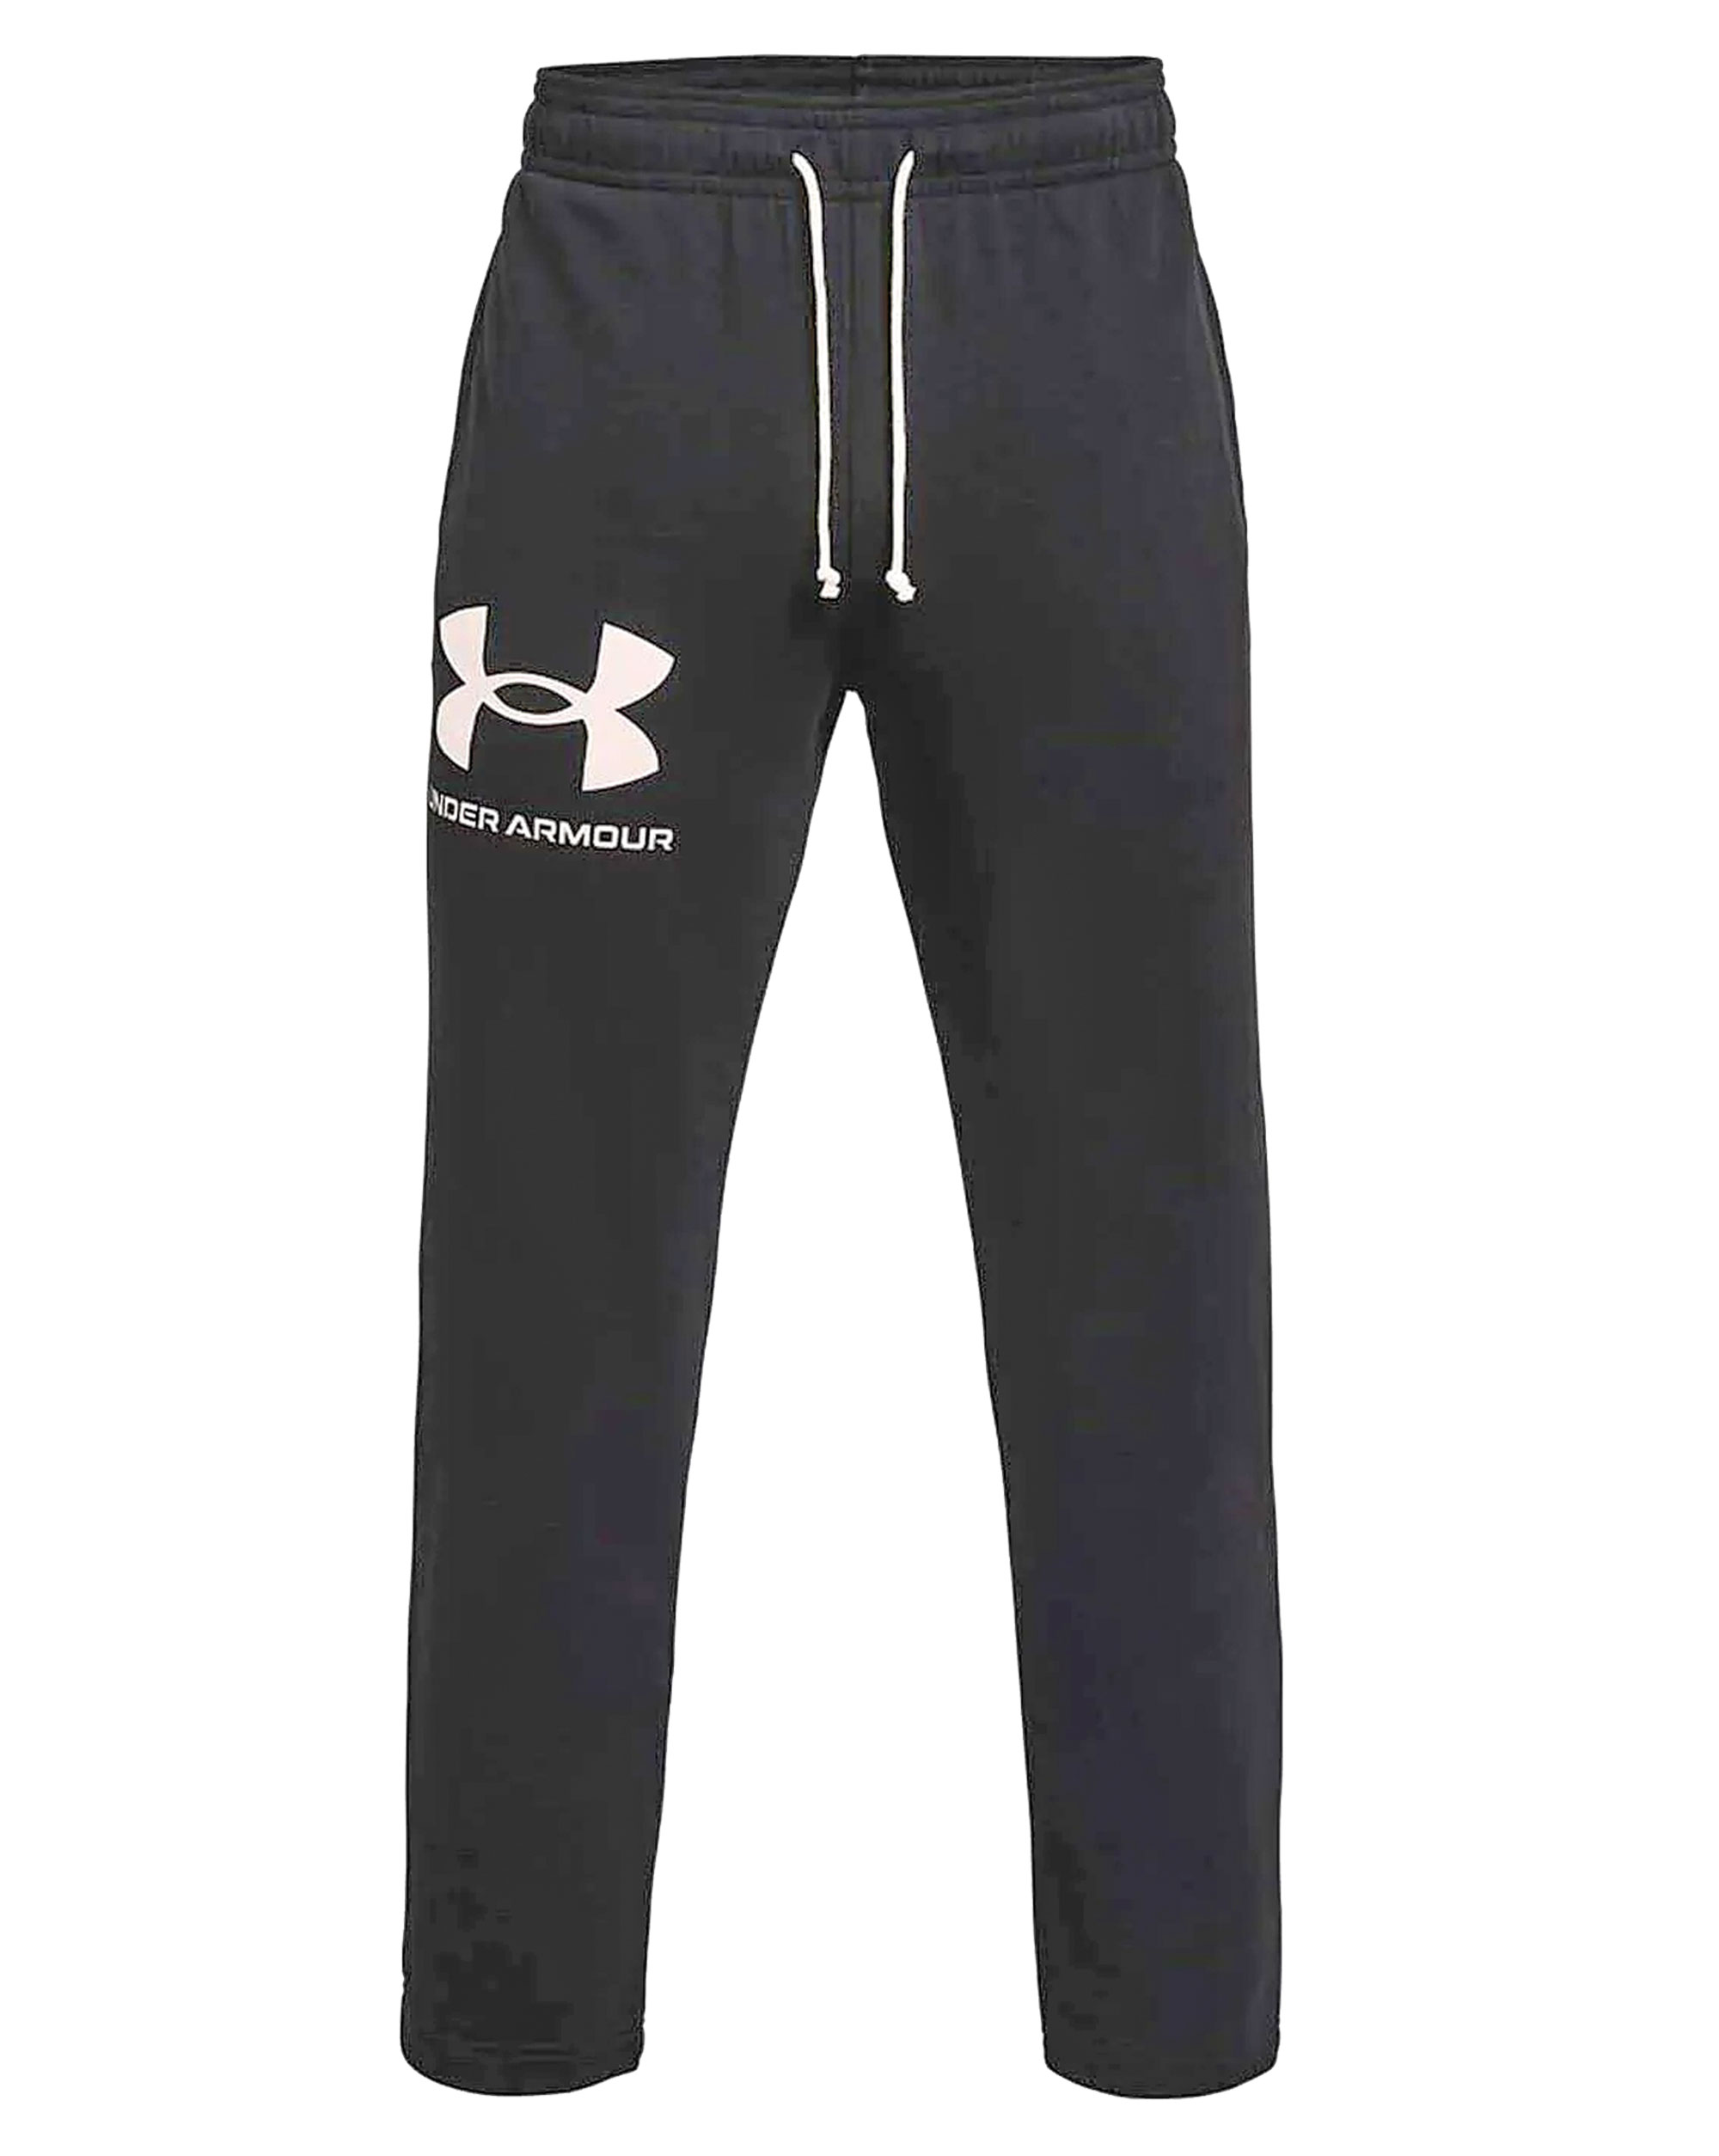 Under Armour Men's Rival AMP Sweatpants French Terry | Recon Company